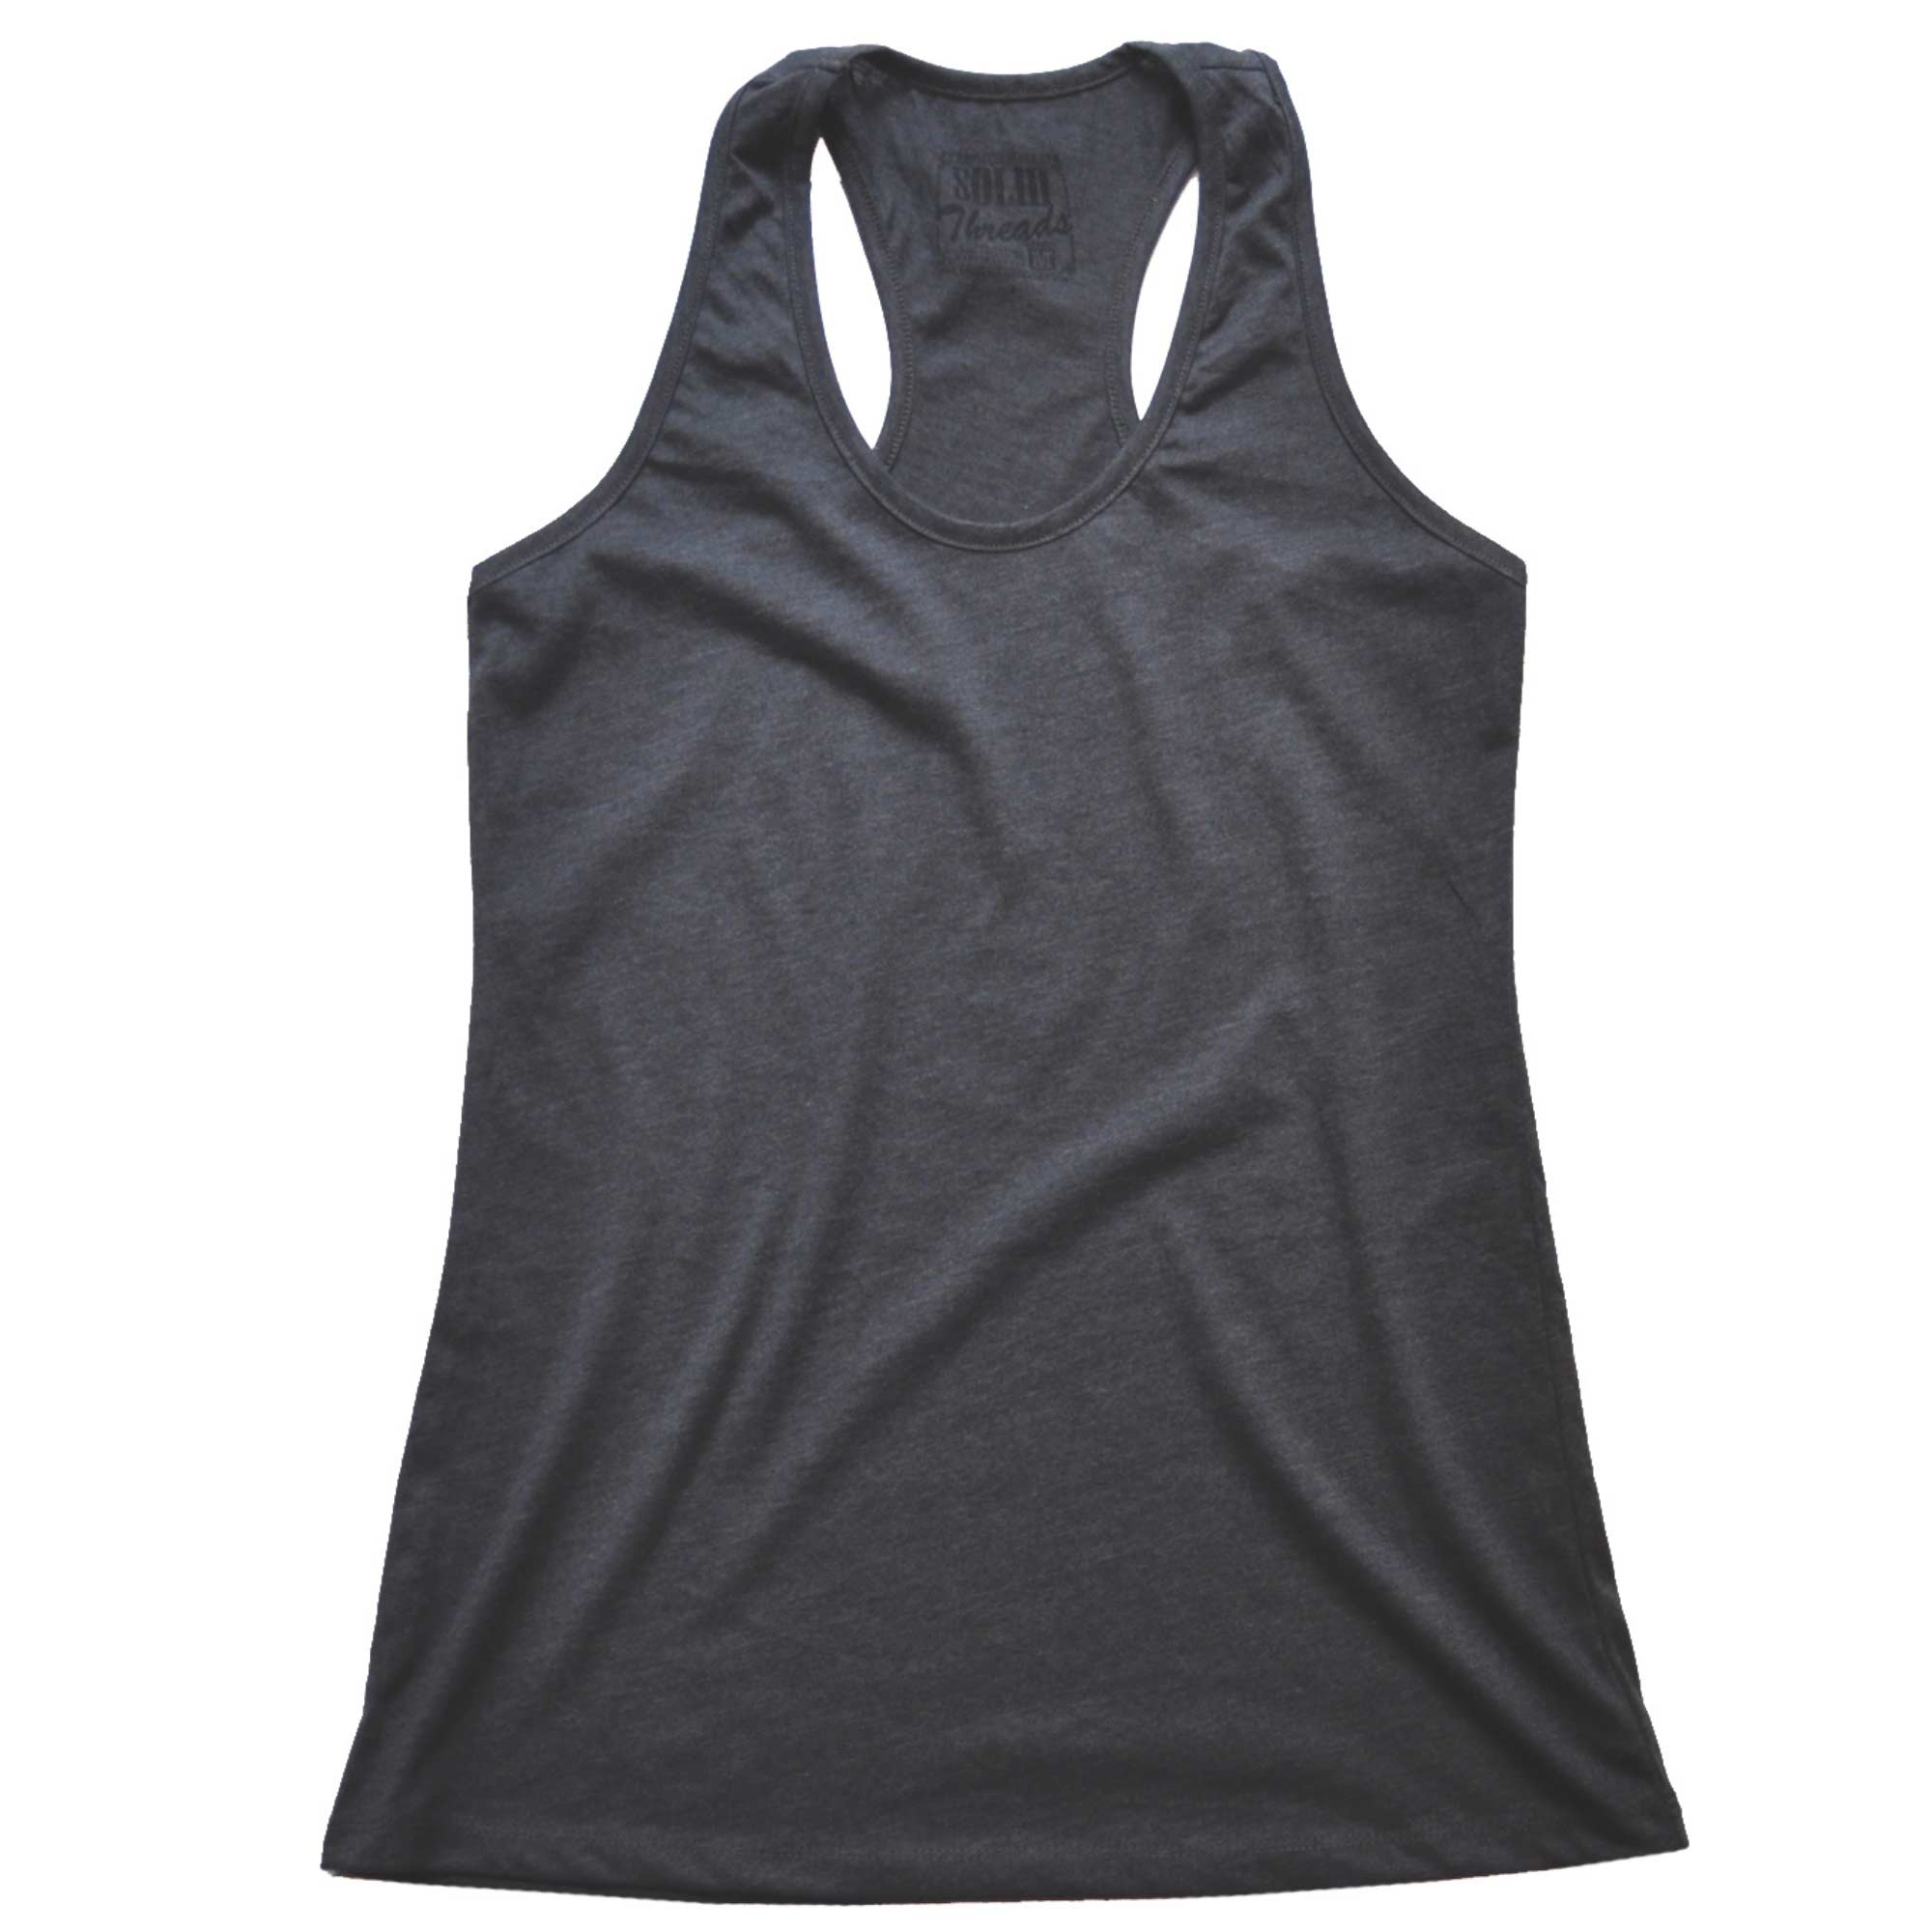 Women's Solid Threads Charcoal Tank Top | Vintage Inspired USA Made Tee